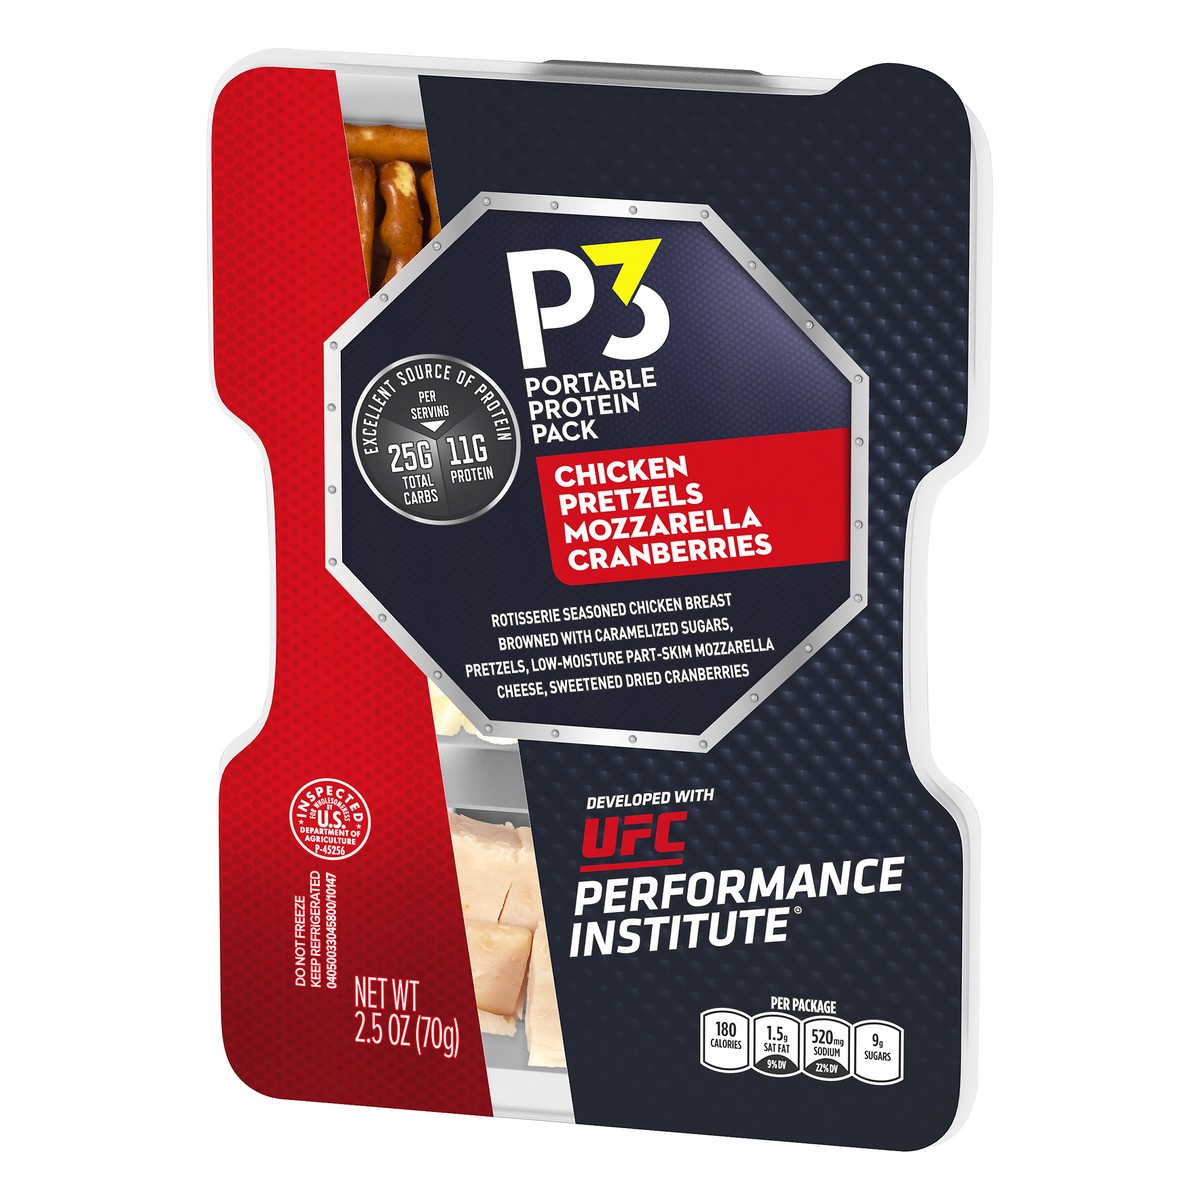 slide 3 of 10, P3 Portable Protein Pack Developed With UFC Performance Institute Rotisserie Seasoned Chicken, Pretzels, Mozzarella Cheese, and Dried Cranberries 2.5 oz Tray, 2.5 oz